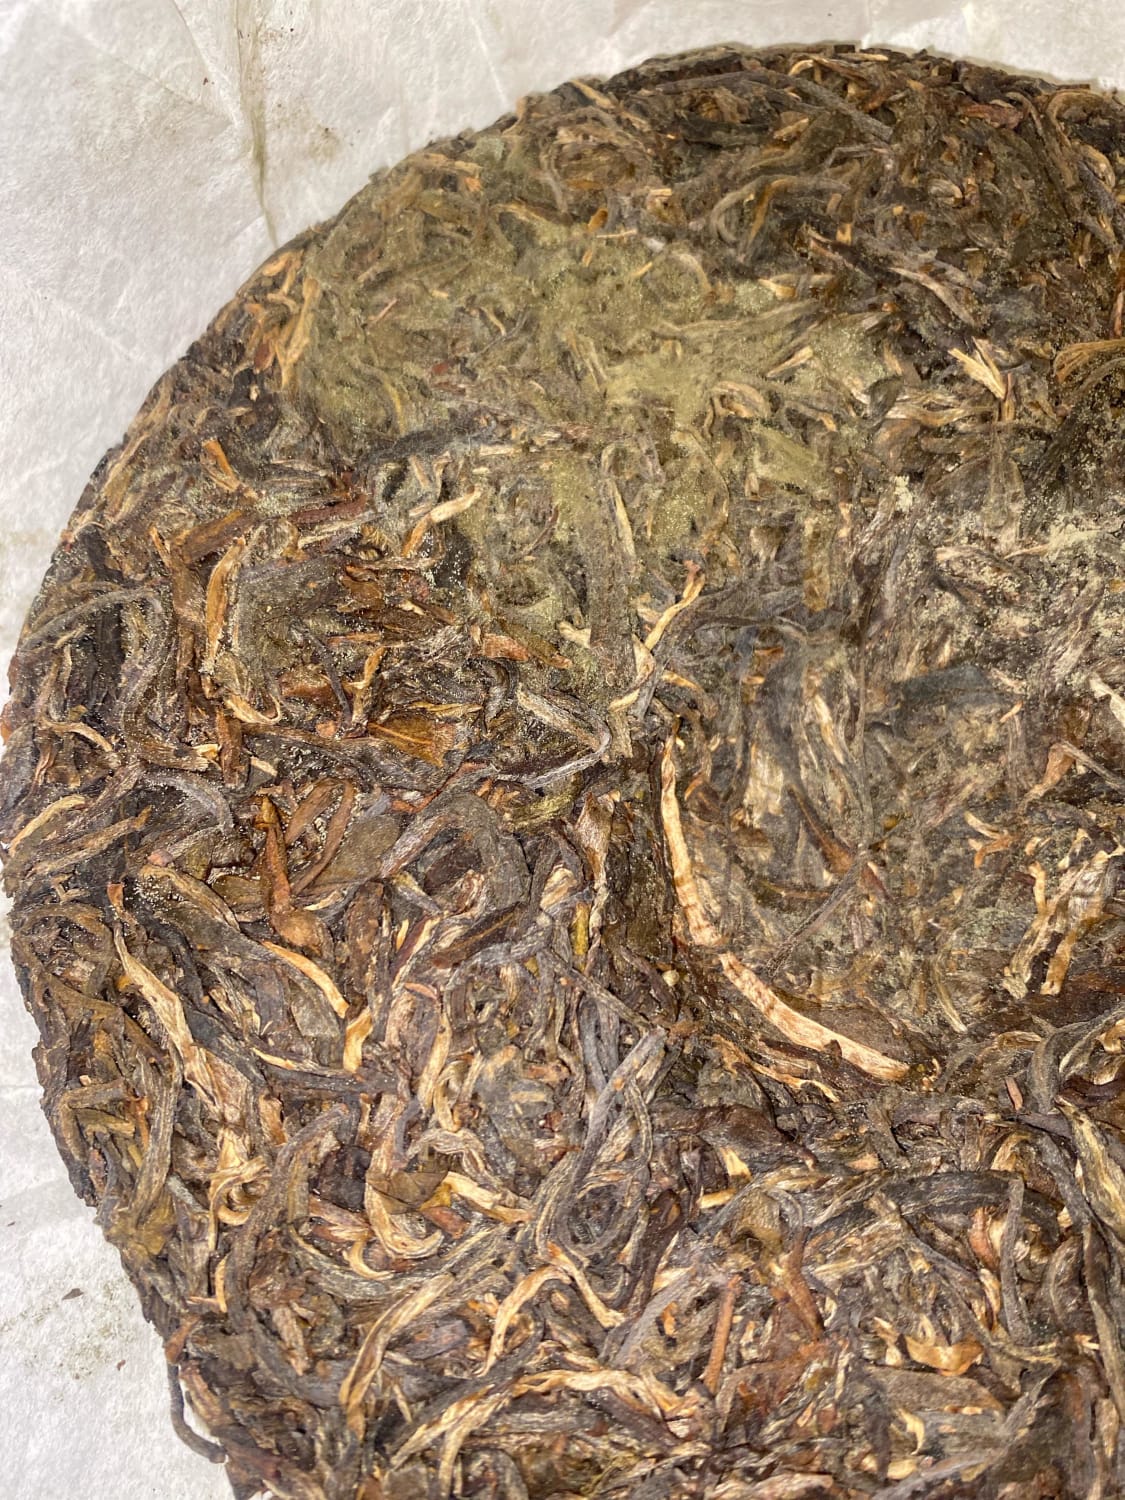 I recently got a puerh tea cake and I’m not sure if this is mold. Is it okay to consume it?